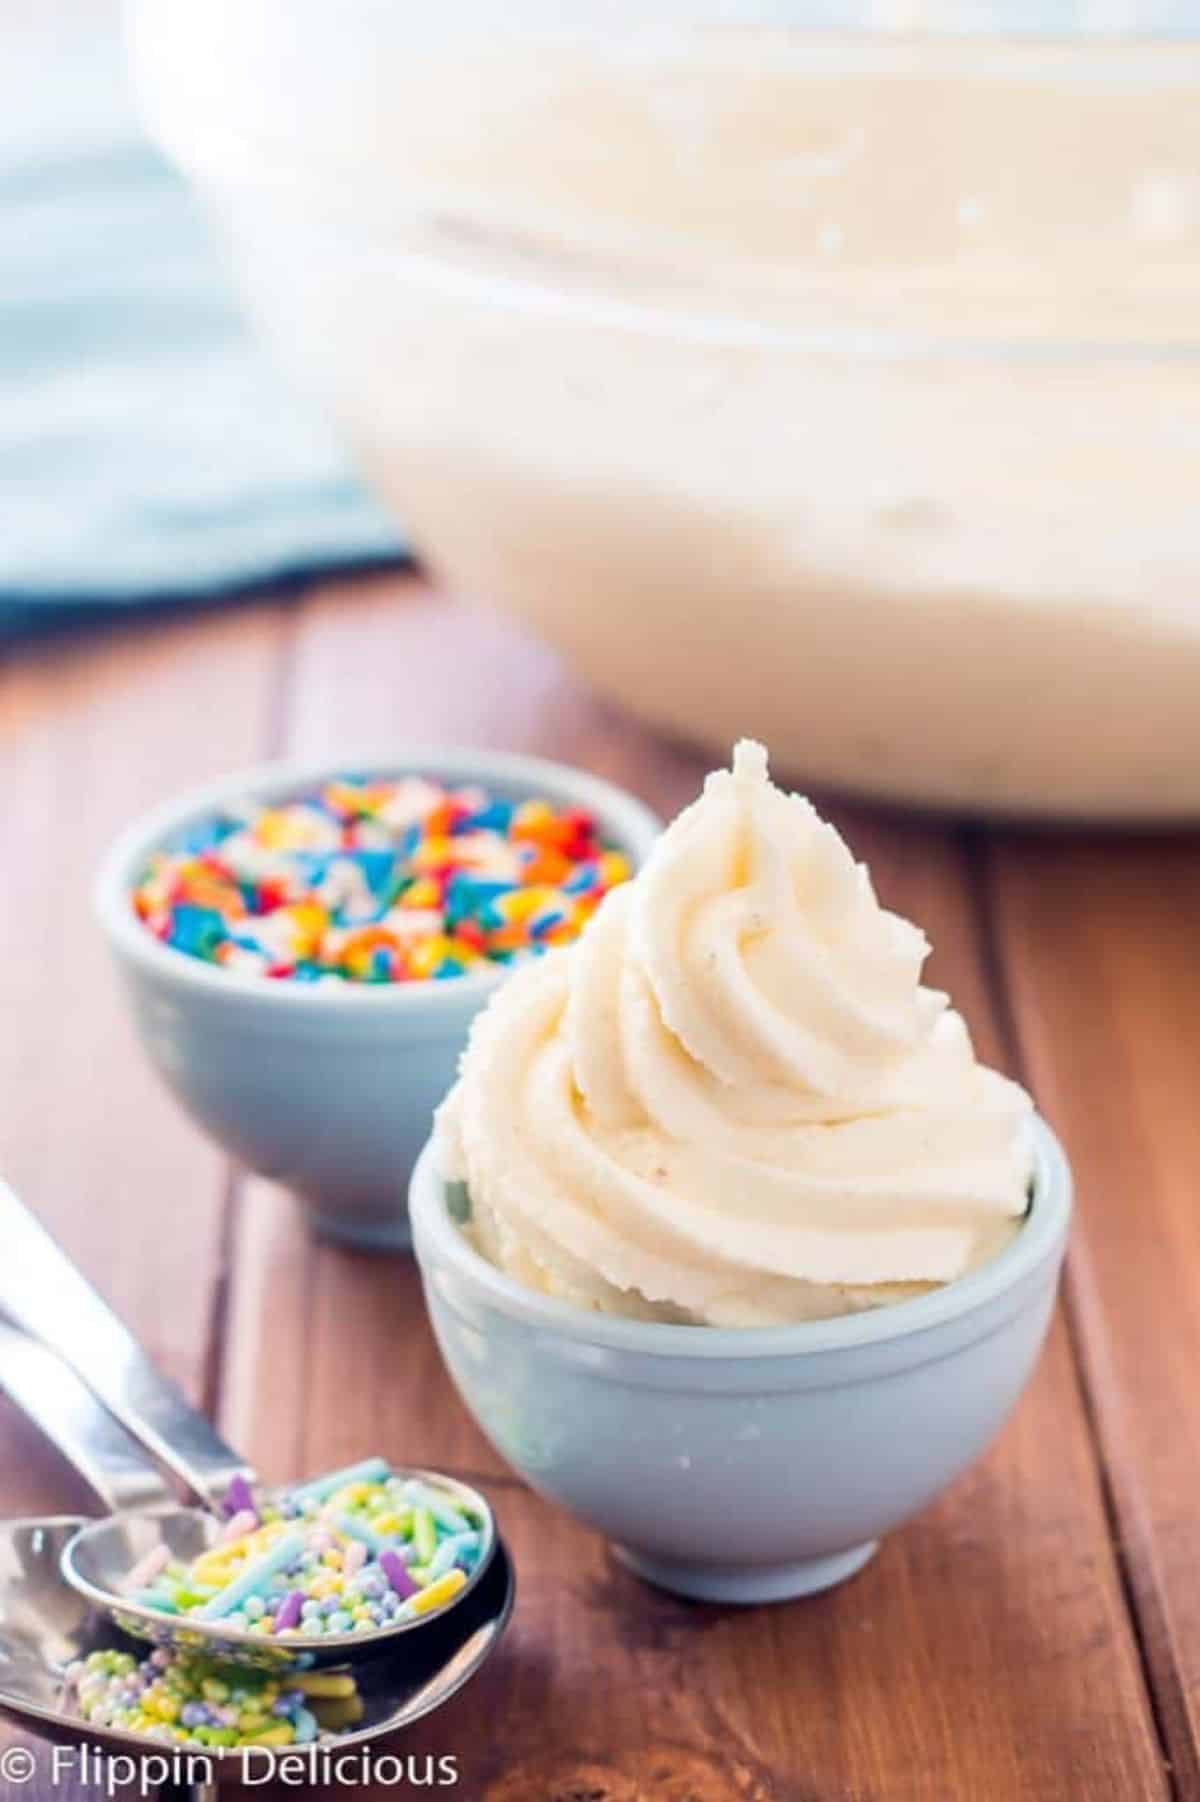 Tasty Vegan Buttercream Frosting in a small blue bowl.